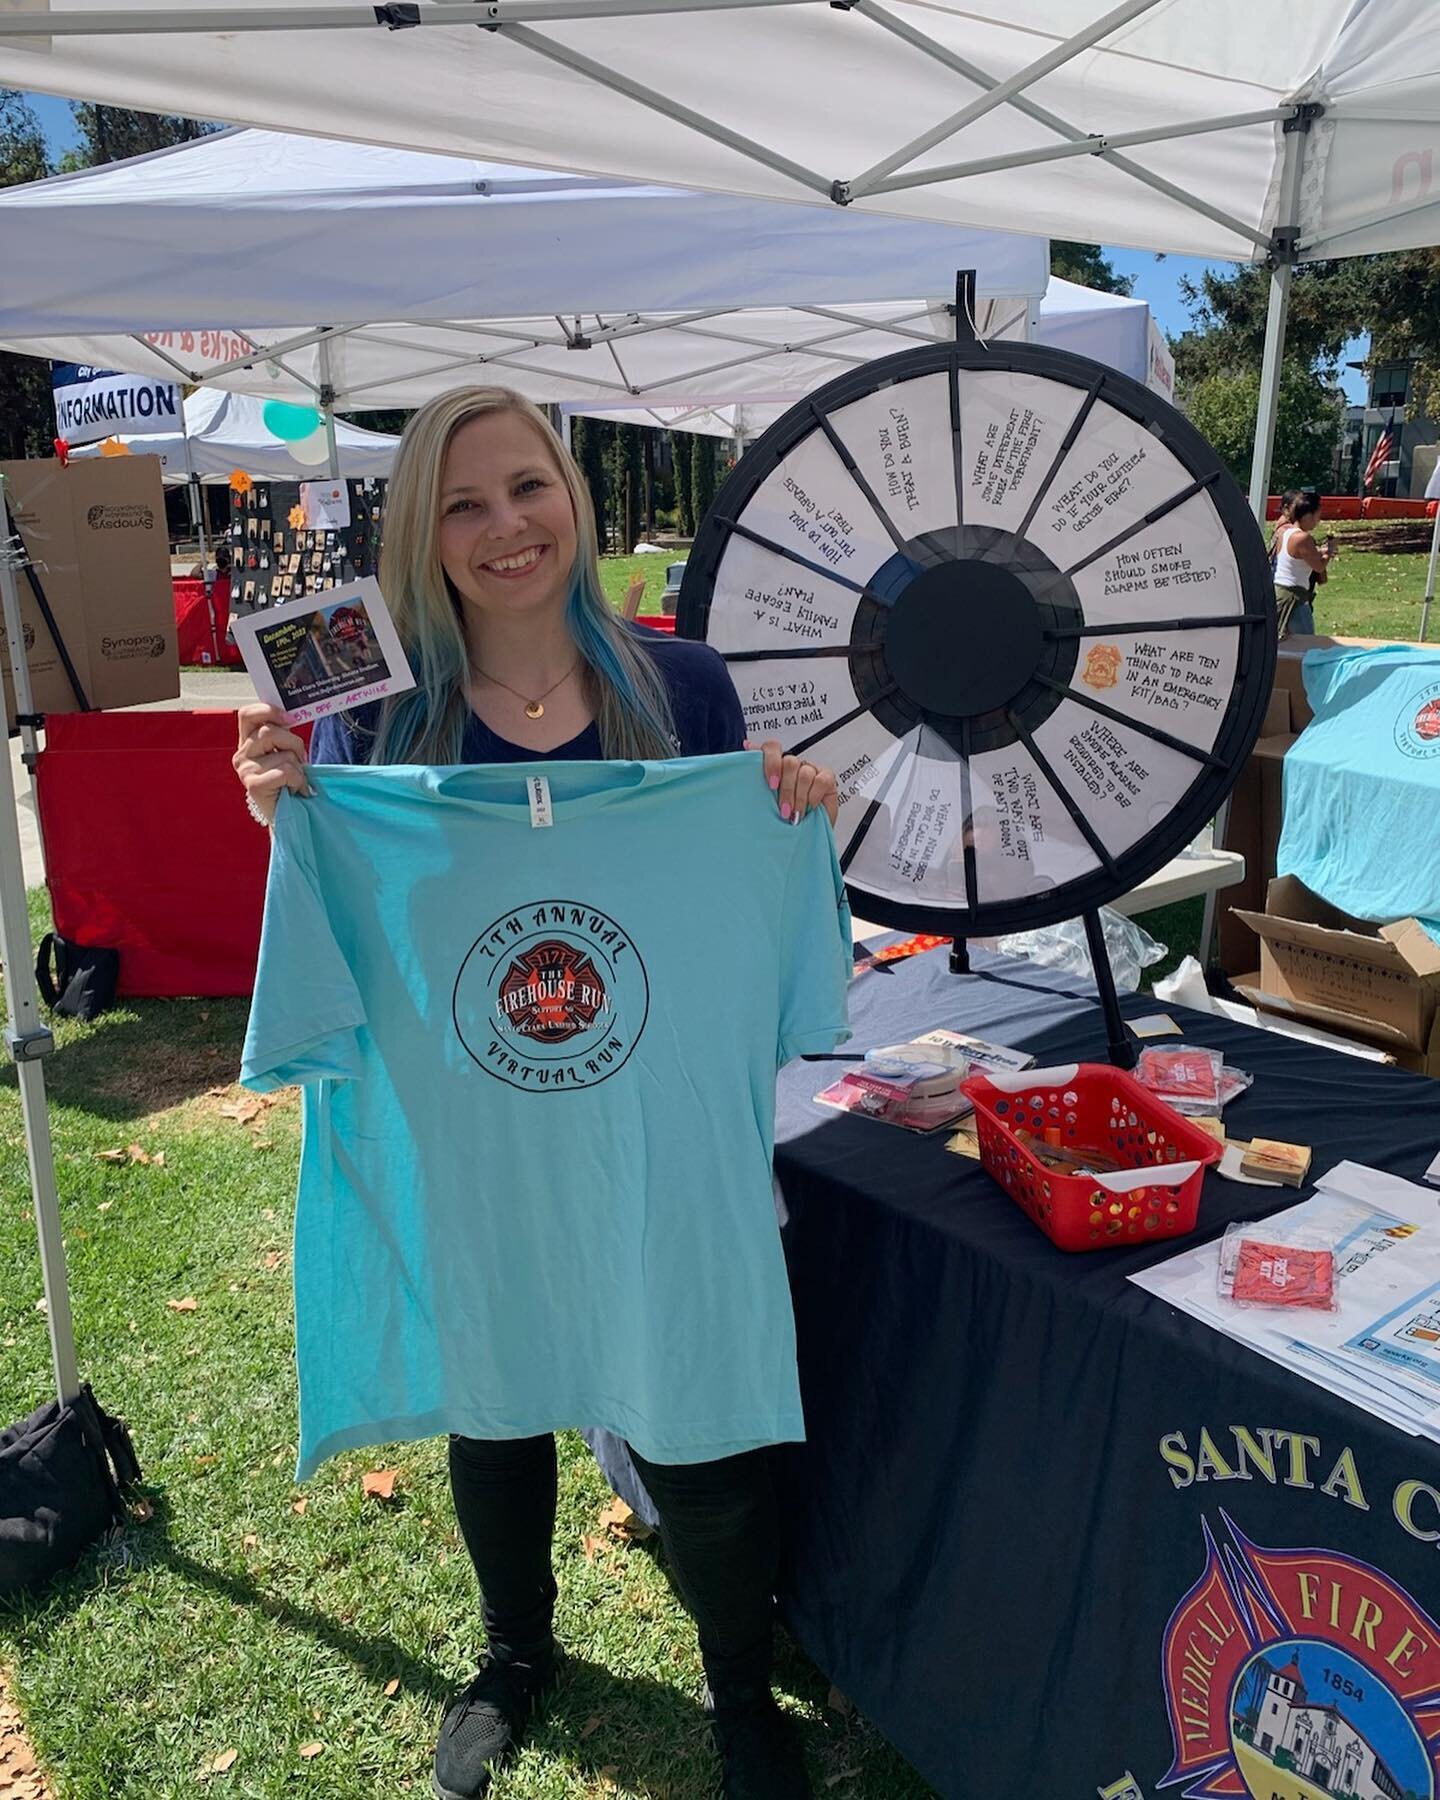 Stop by at today or tomorrow at the Art &amp; Wine Festival in Santa Clara. We are giving away race swag from previous years including shirts and medals!